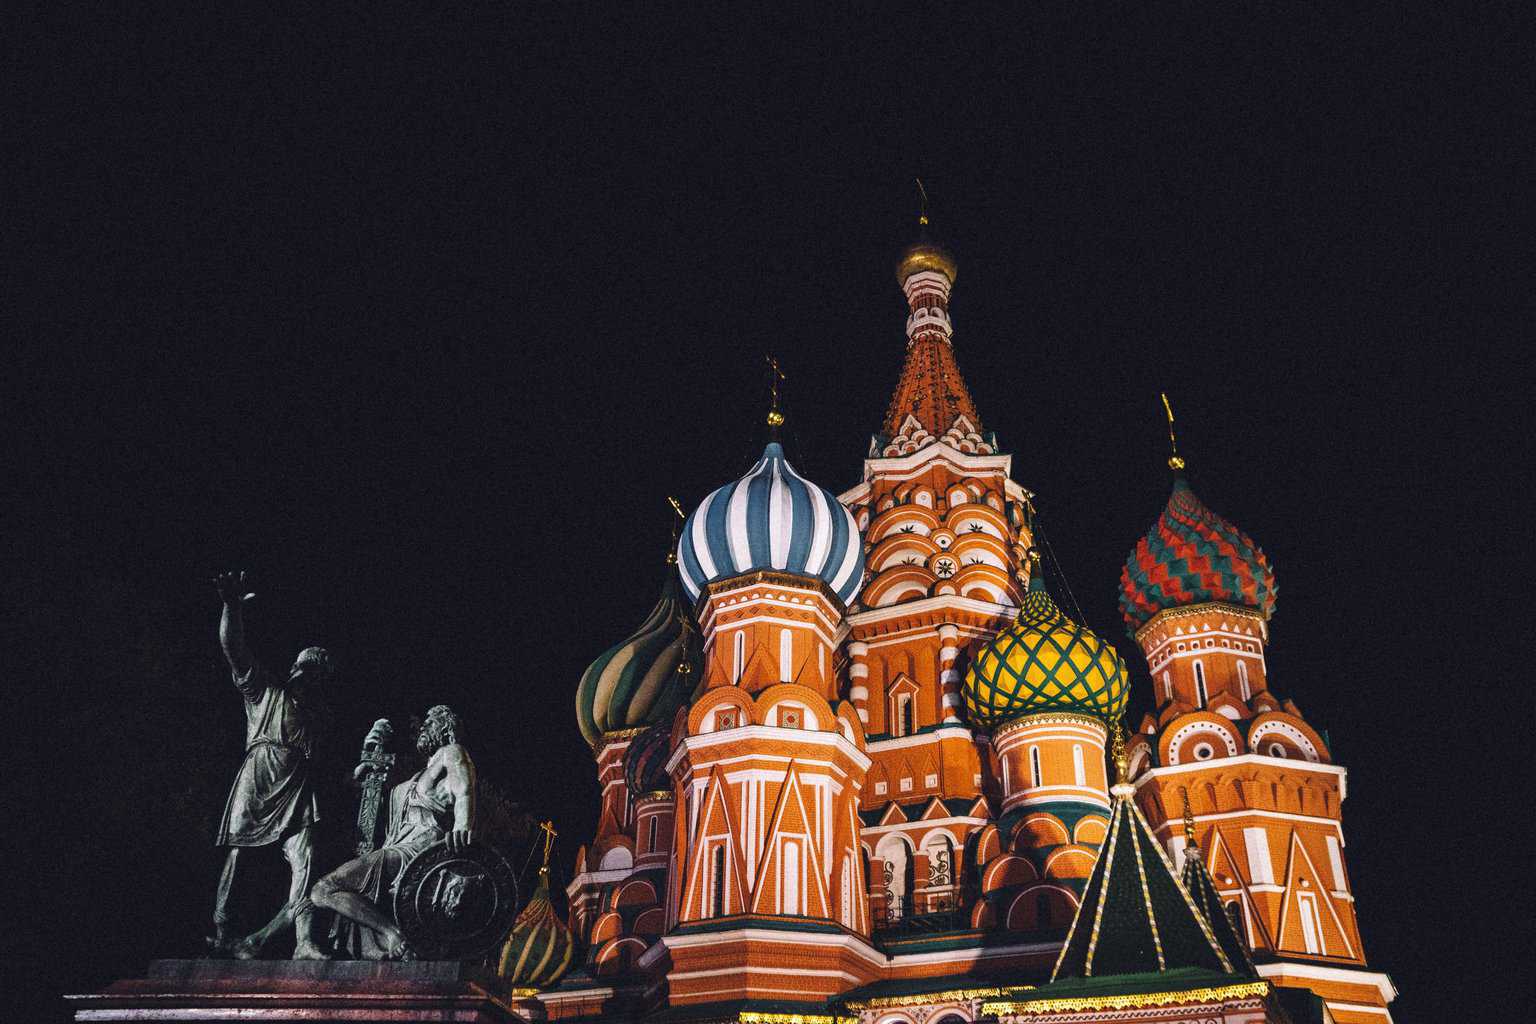 St. Basil's Cathedral. This was taken during my first night in Moscow. Decided to take a stroll down the Red Square to see all the sights.